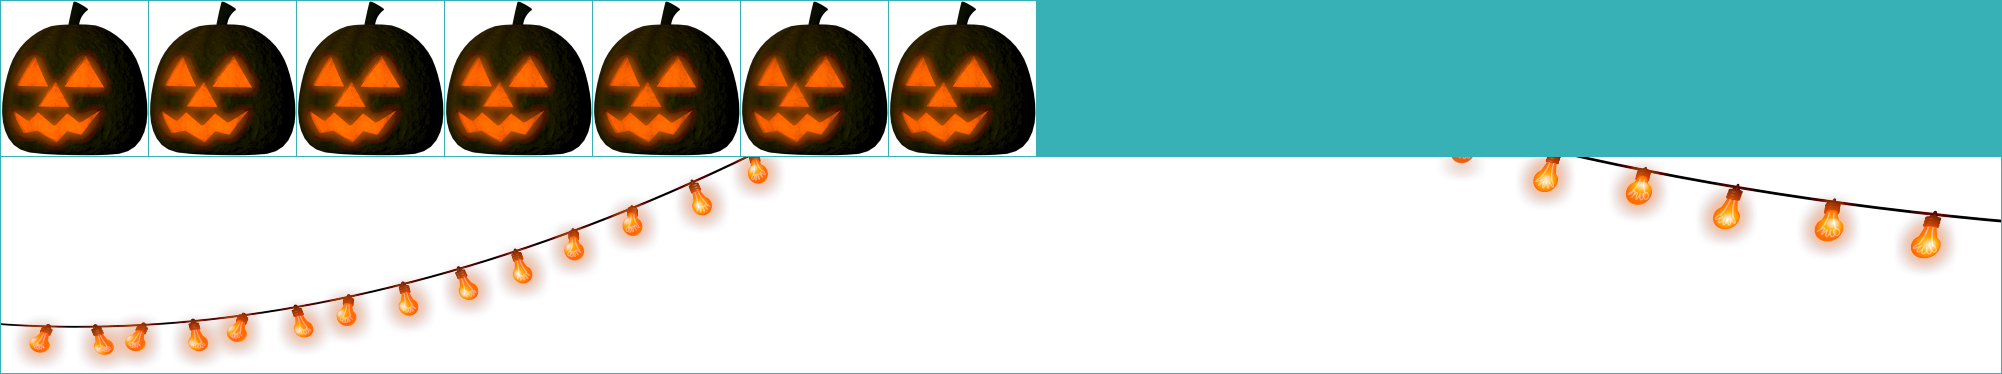 Five Nights at Freddy's 3 - Halloween Decorations